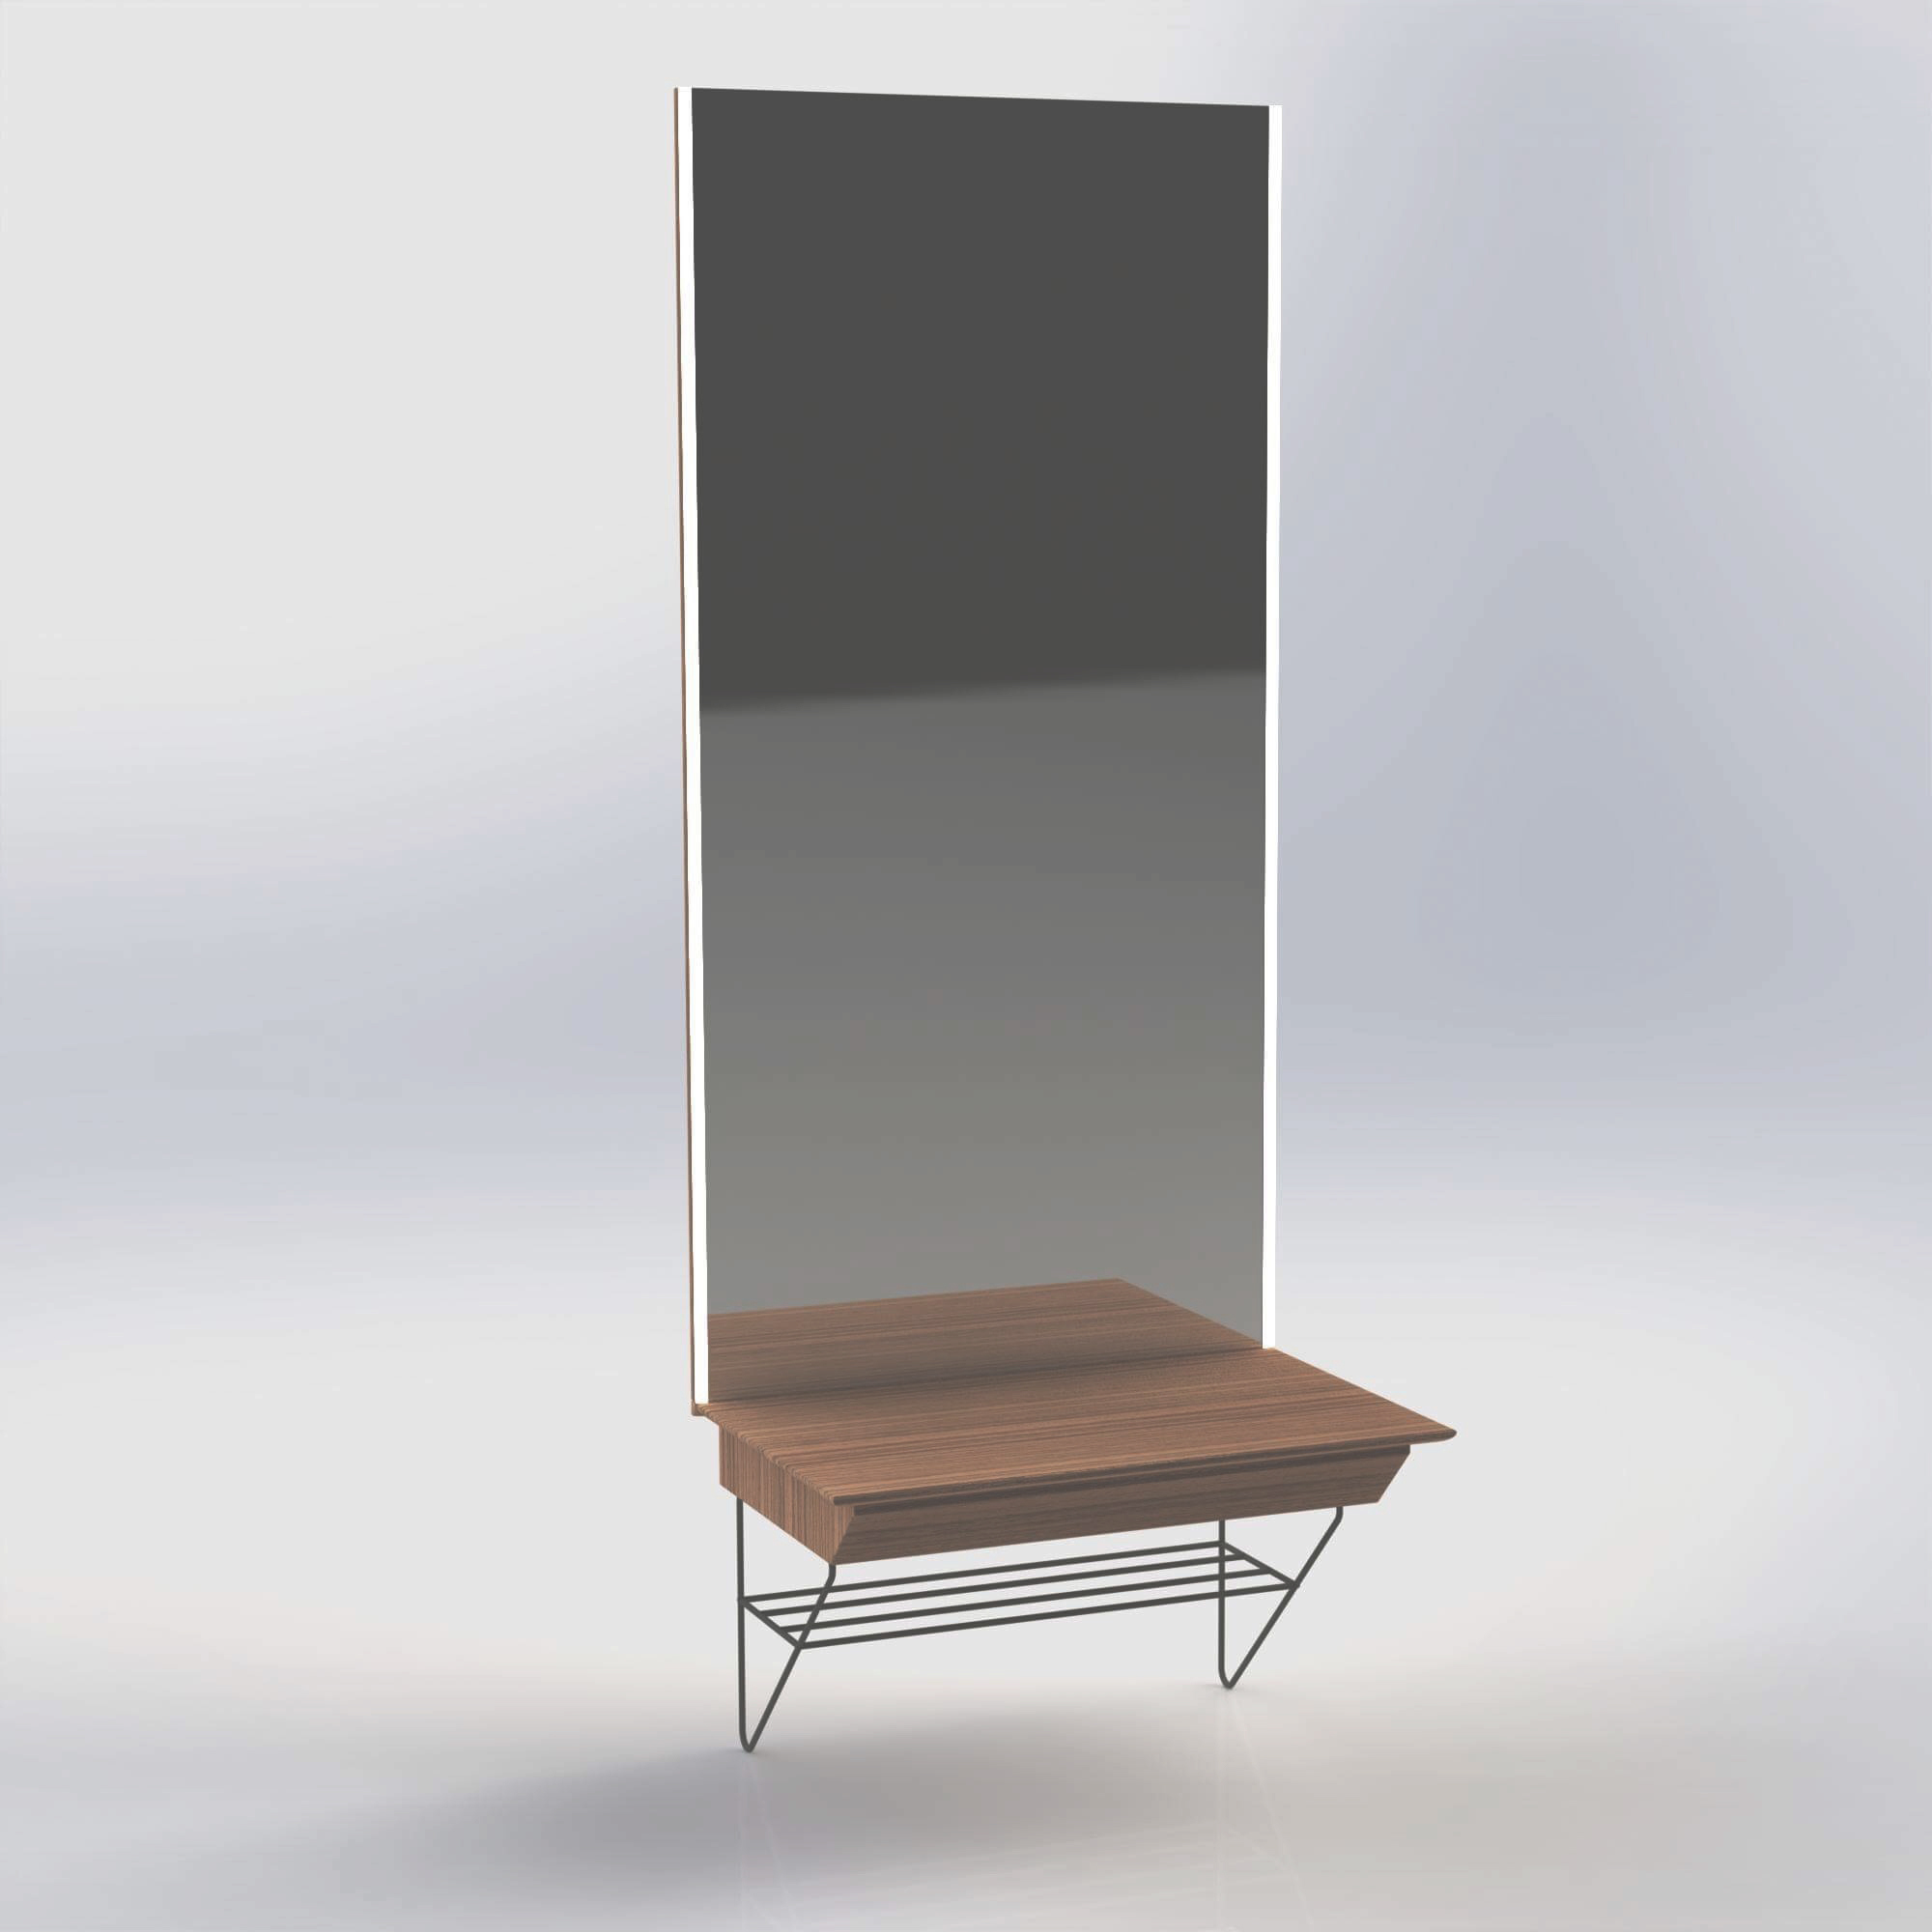 Cabinet with mirror and led stripes made in Solidworks, by Sebastian Galo